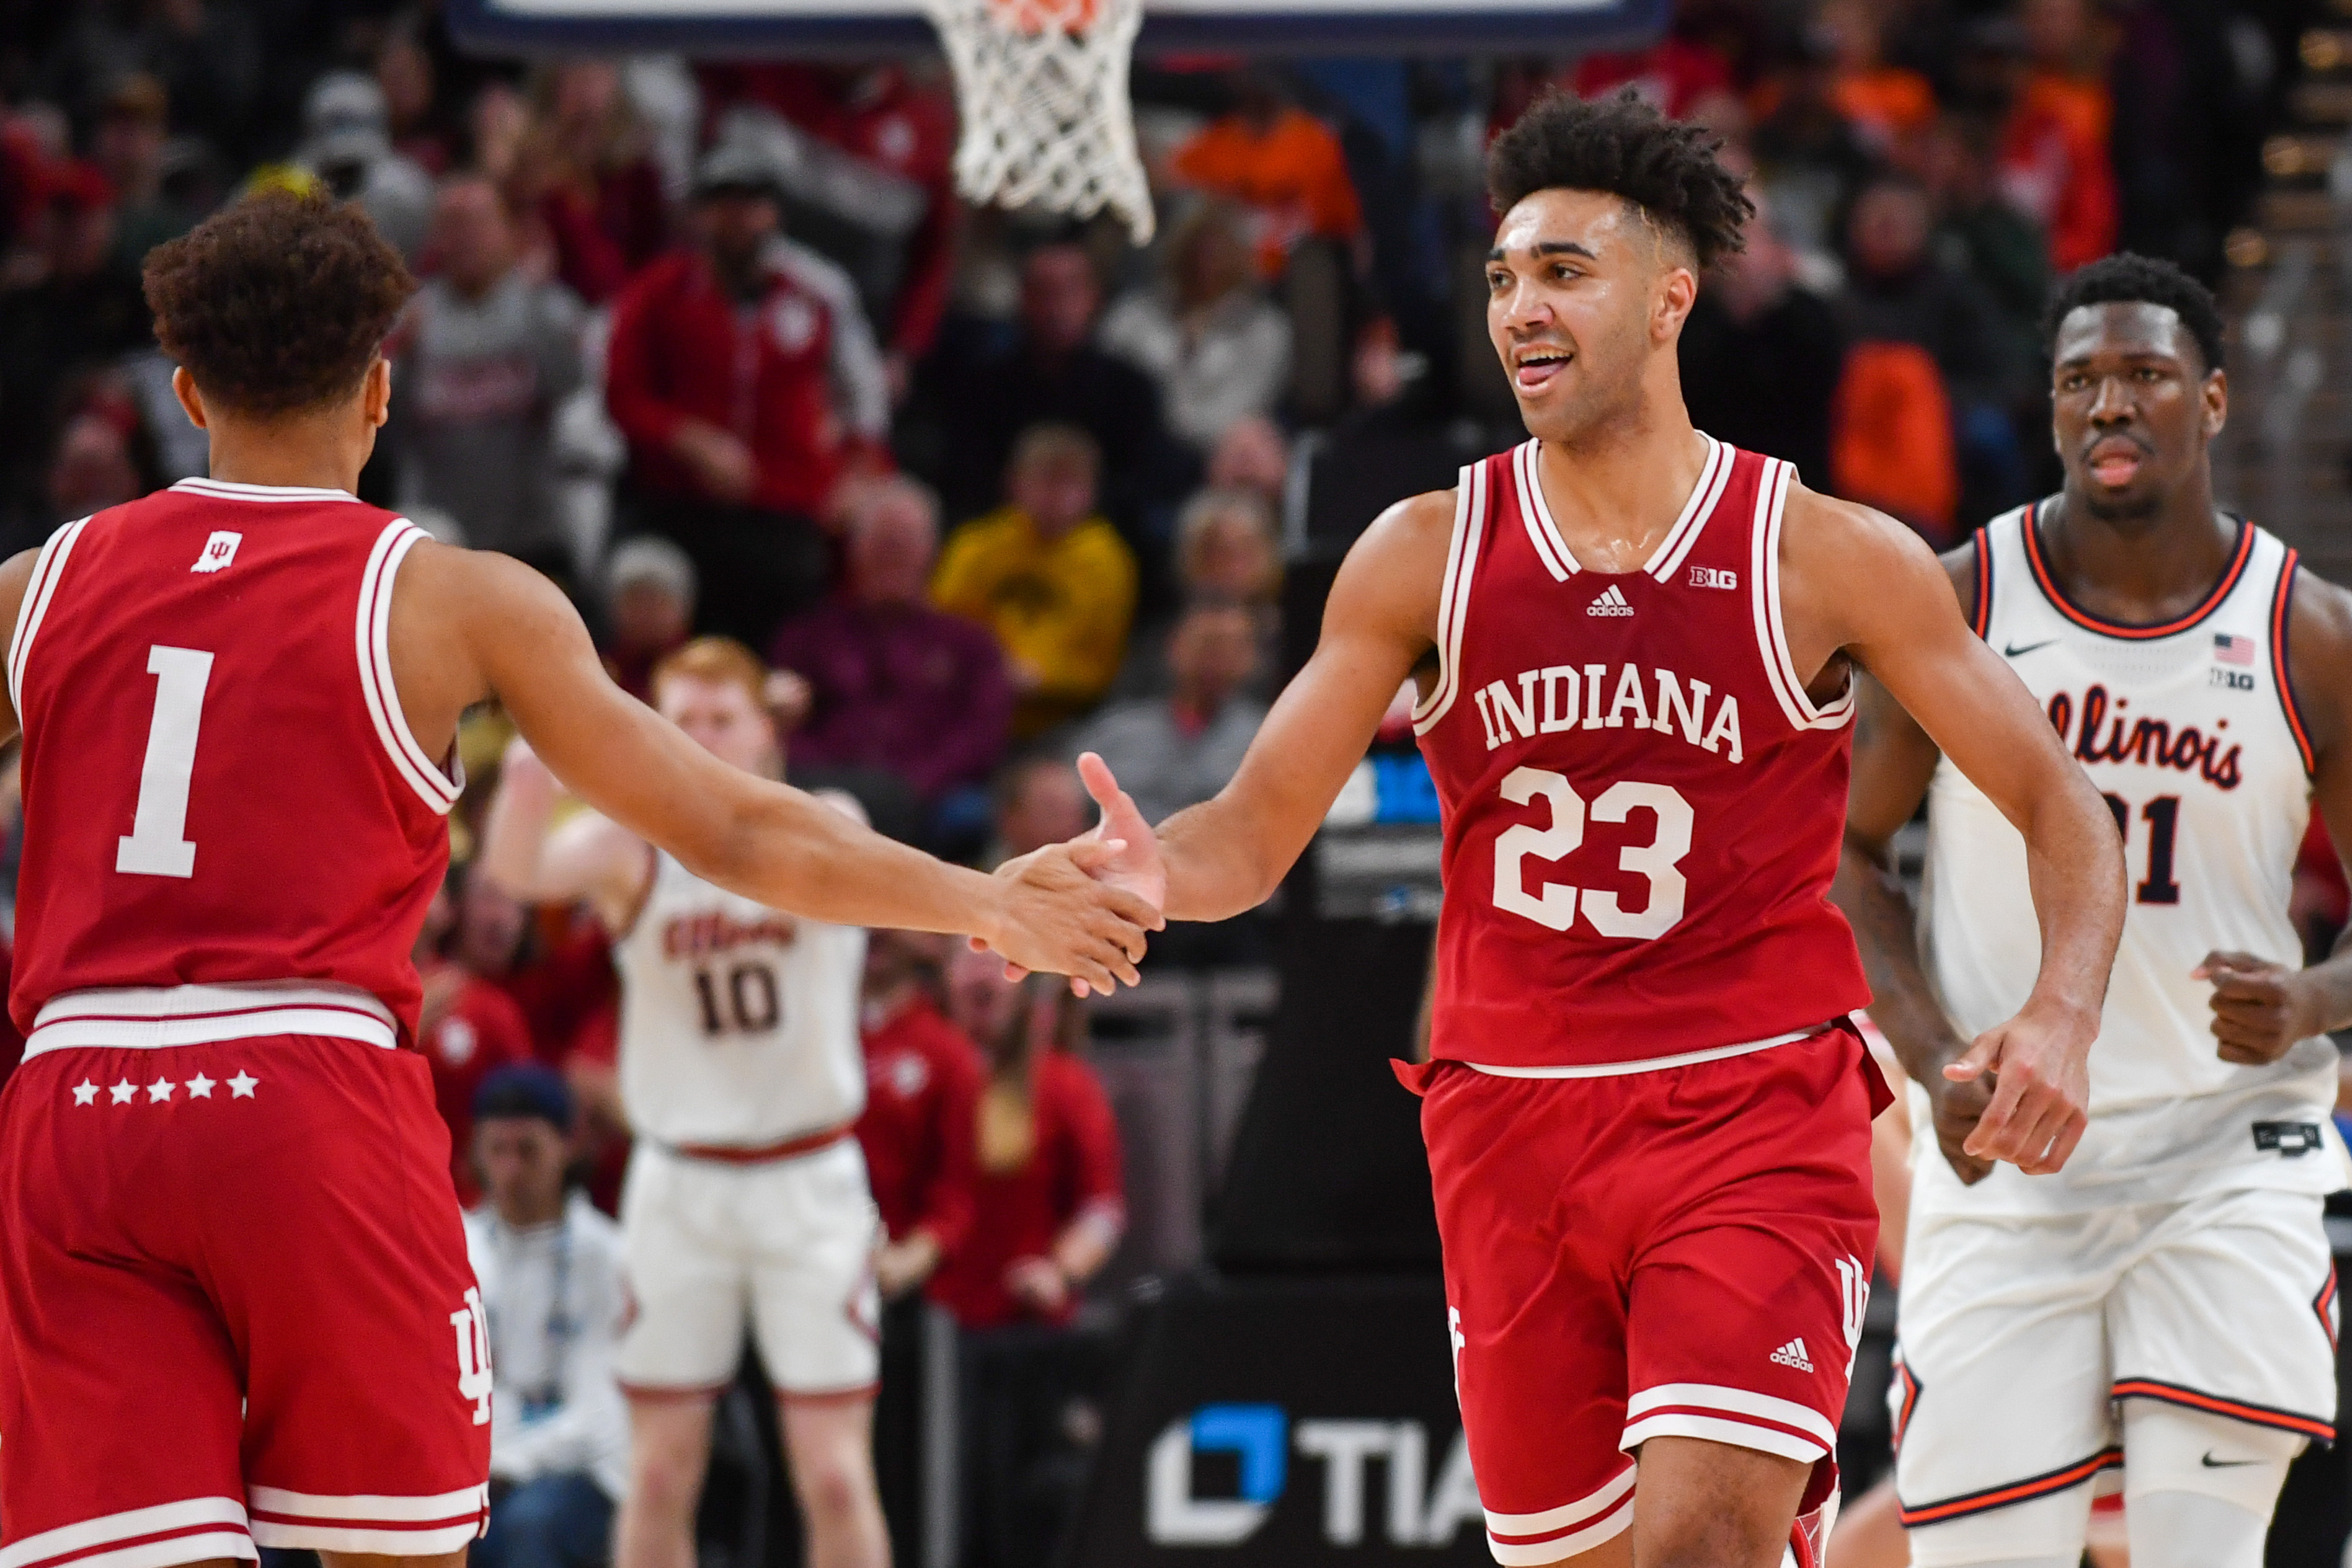 Trayce Jackson-Davis #23 of the Indiana Hoosiers reaches out in celebration with Rob Phinisee #1